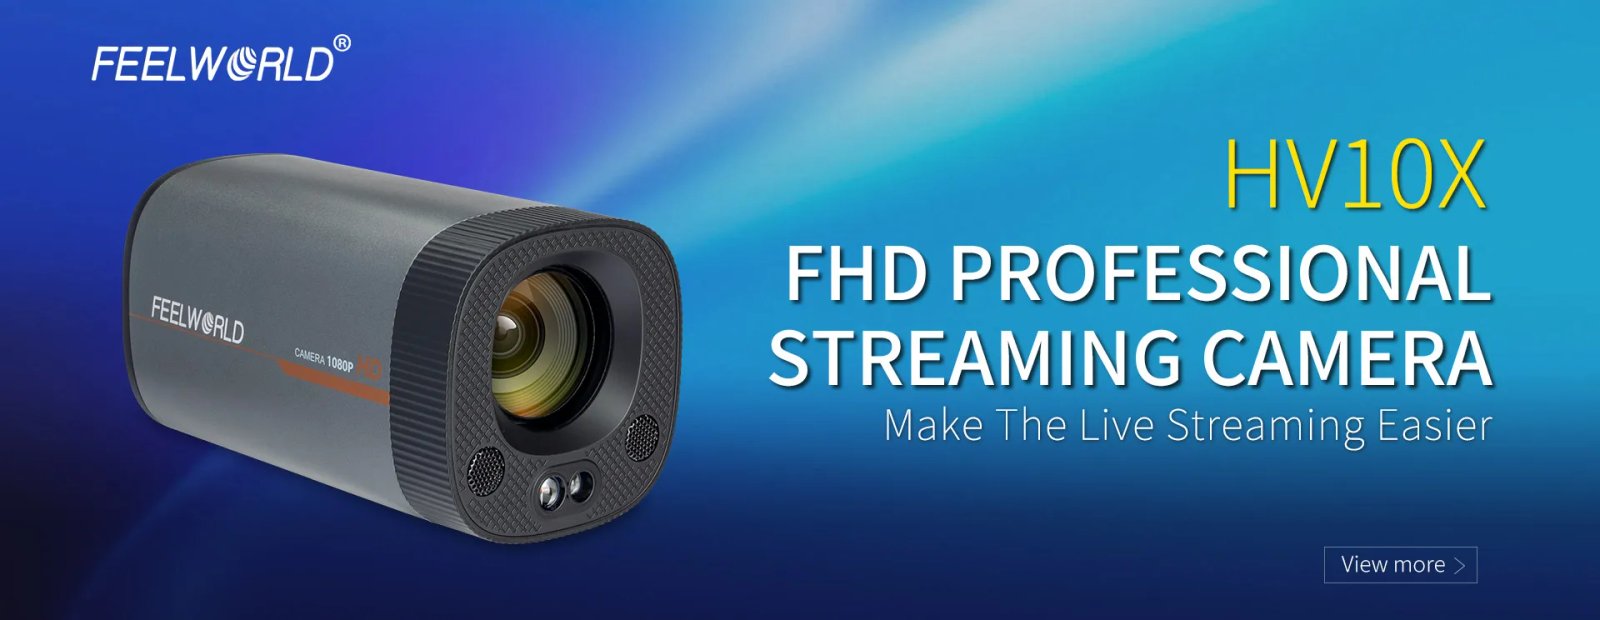 FEELWORLD HV10X Professional Streaming Camera Full HD 1080P 60fps USB3.0 HDMI for Youtube Vlogging Recorder Blogger Meeting